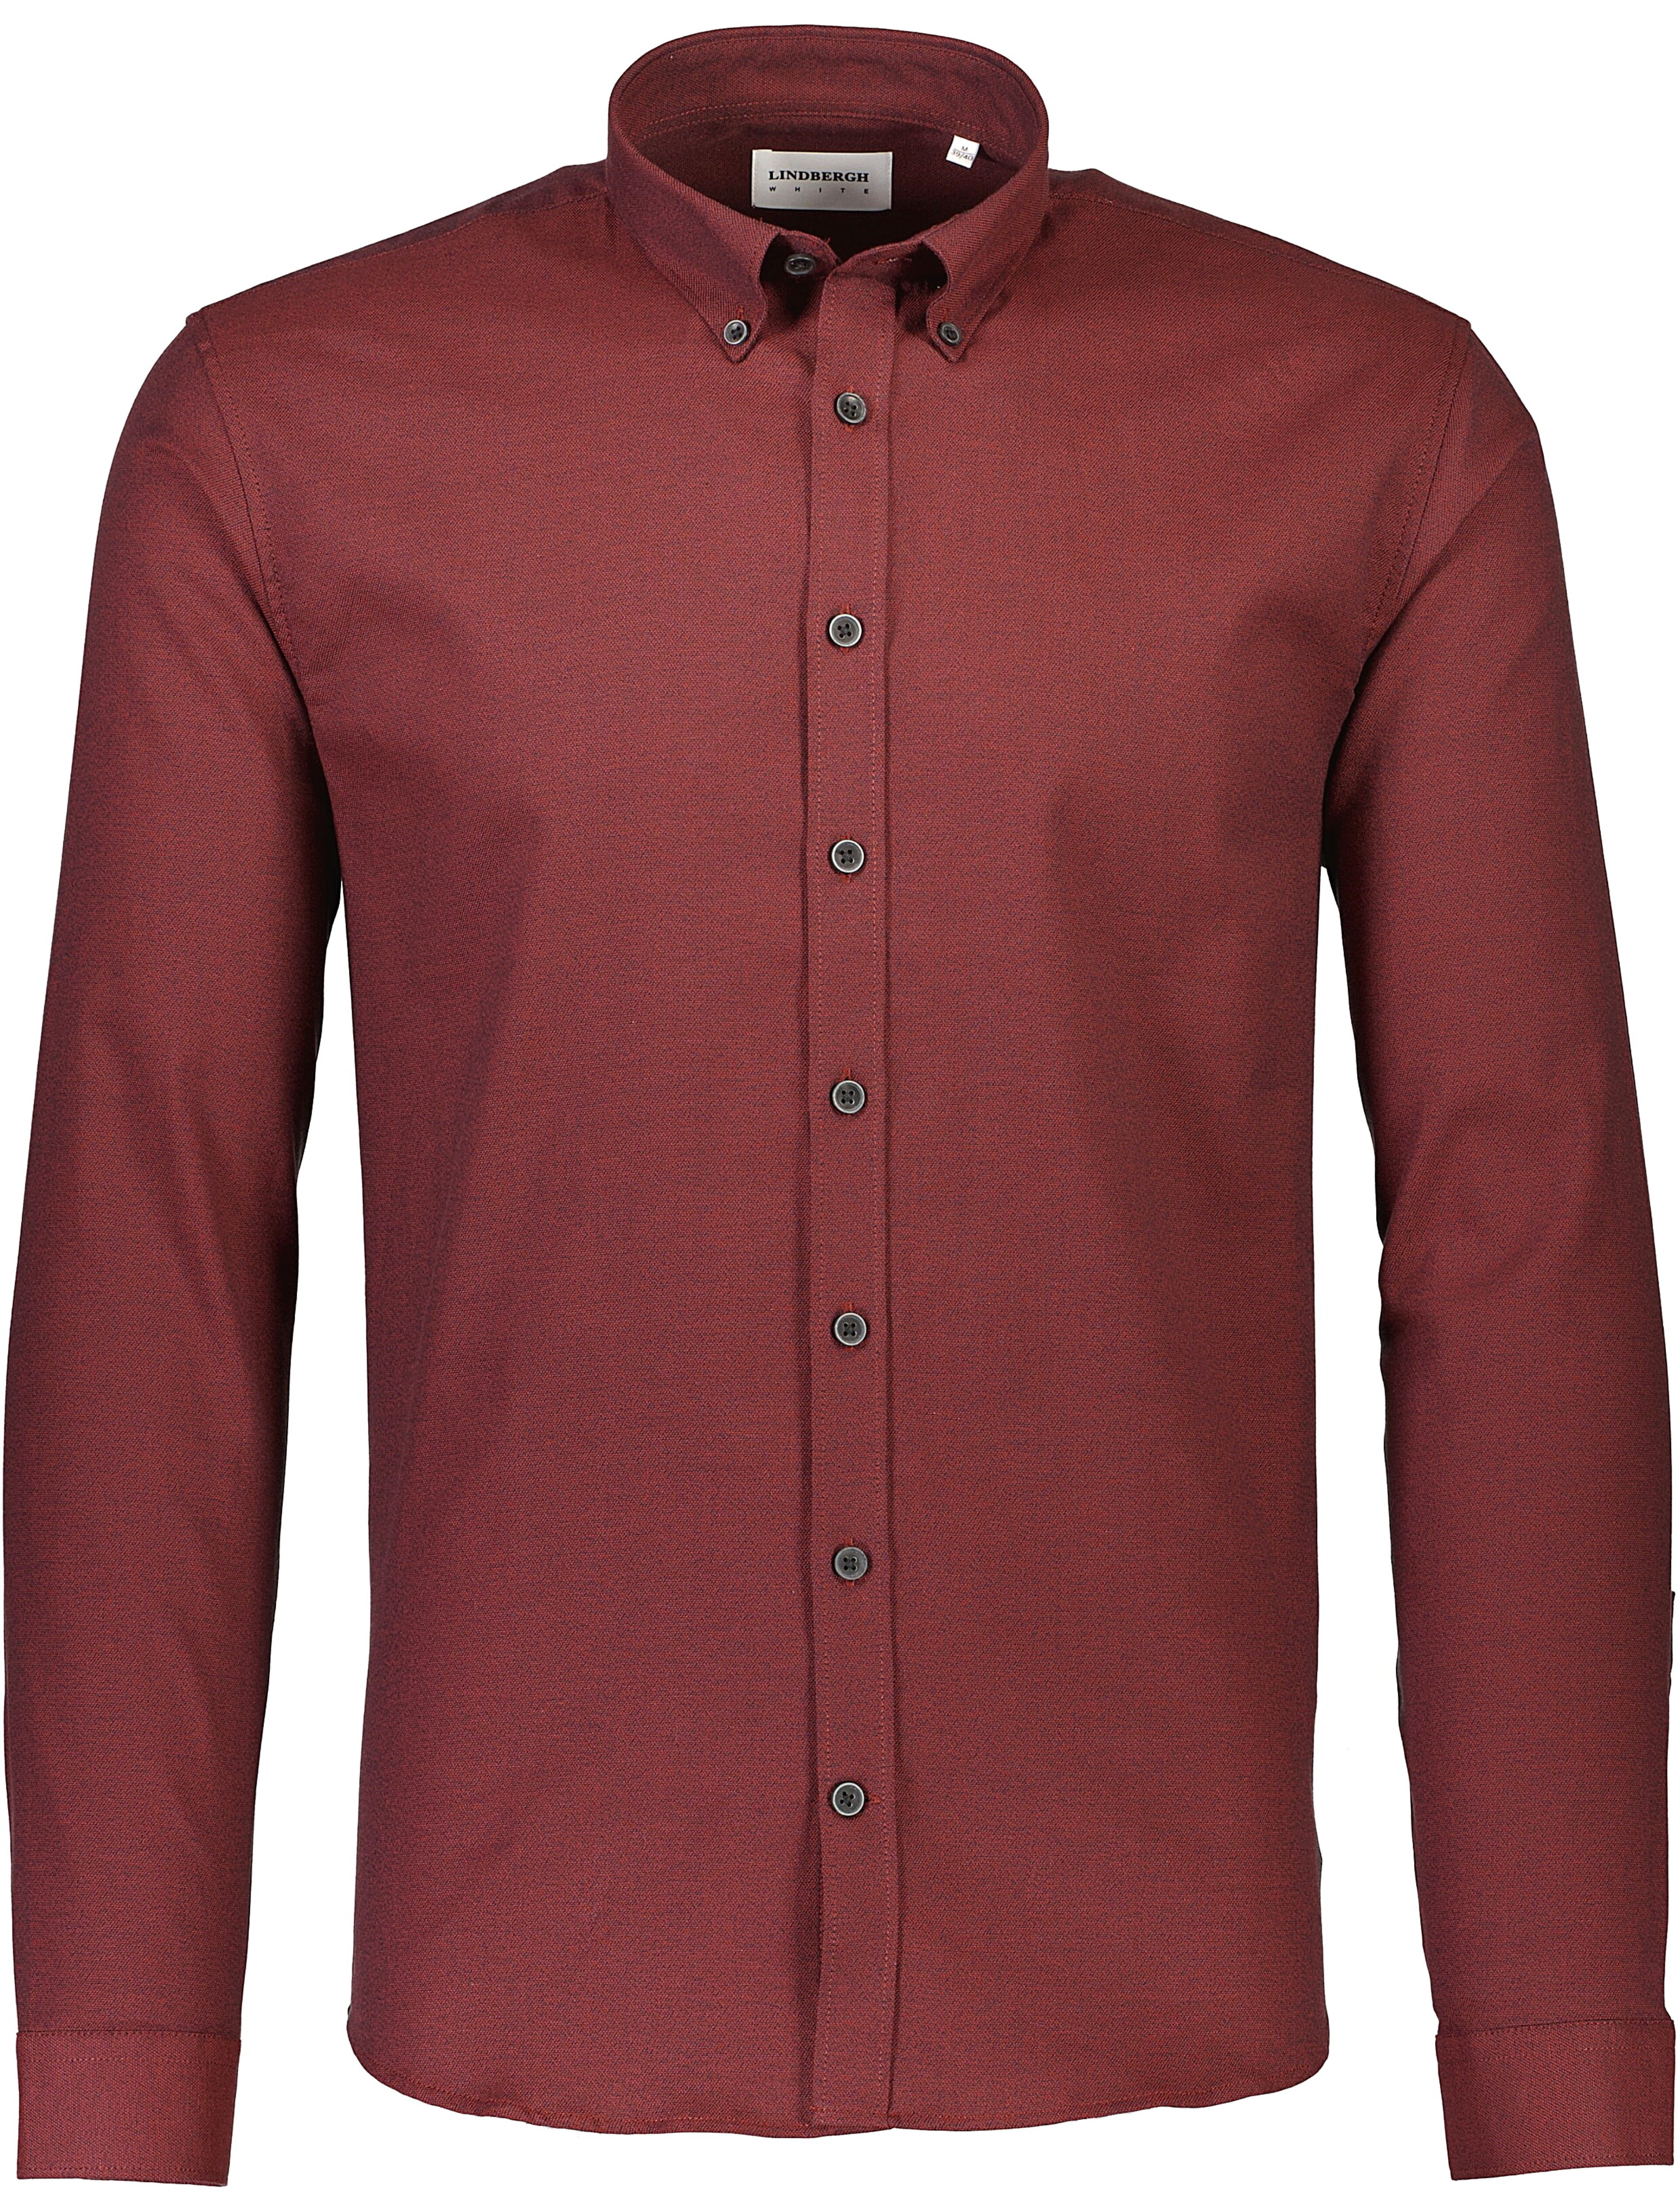 Business casual shirt | Slim fit 30-21064